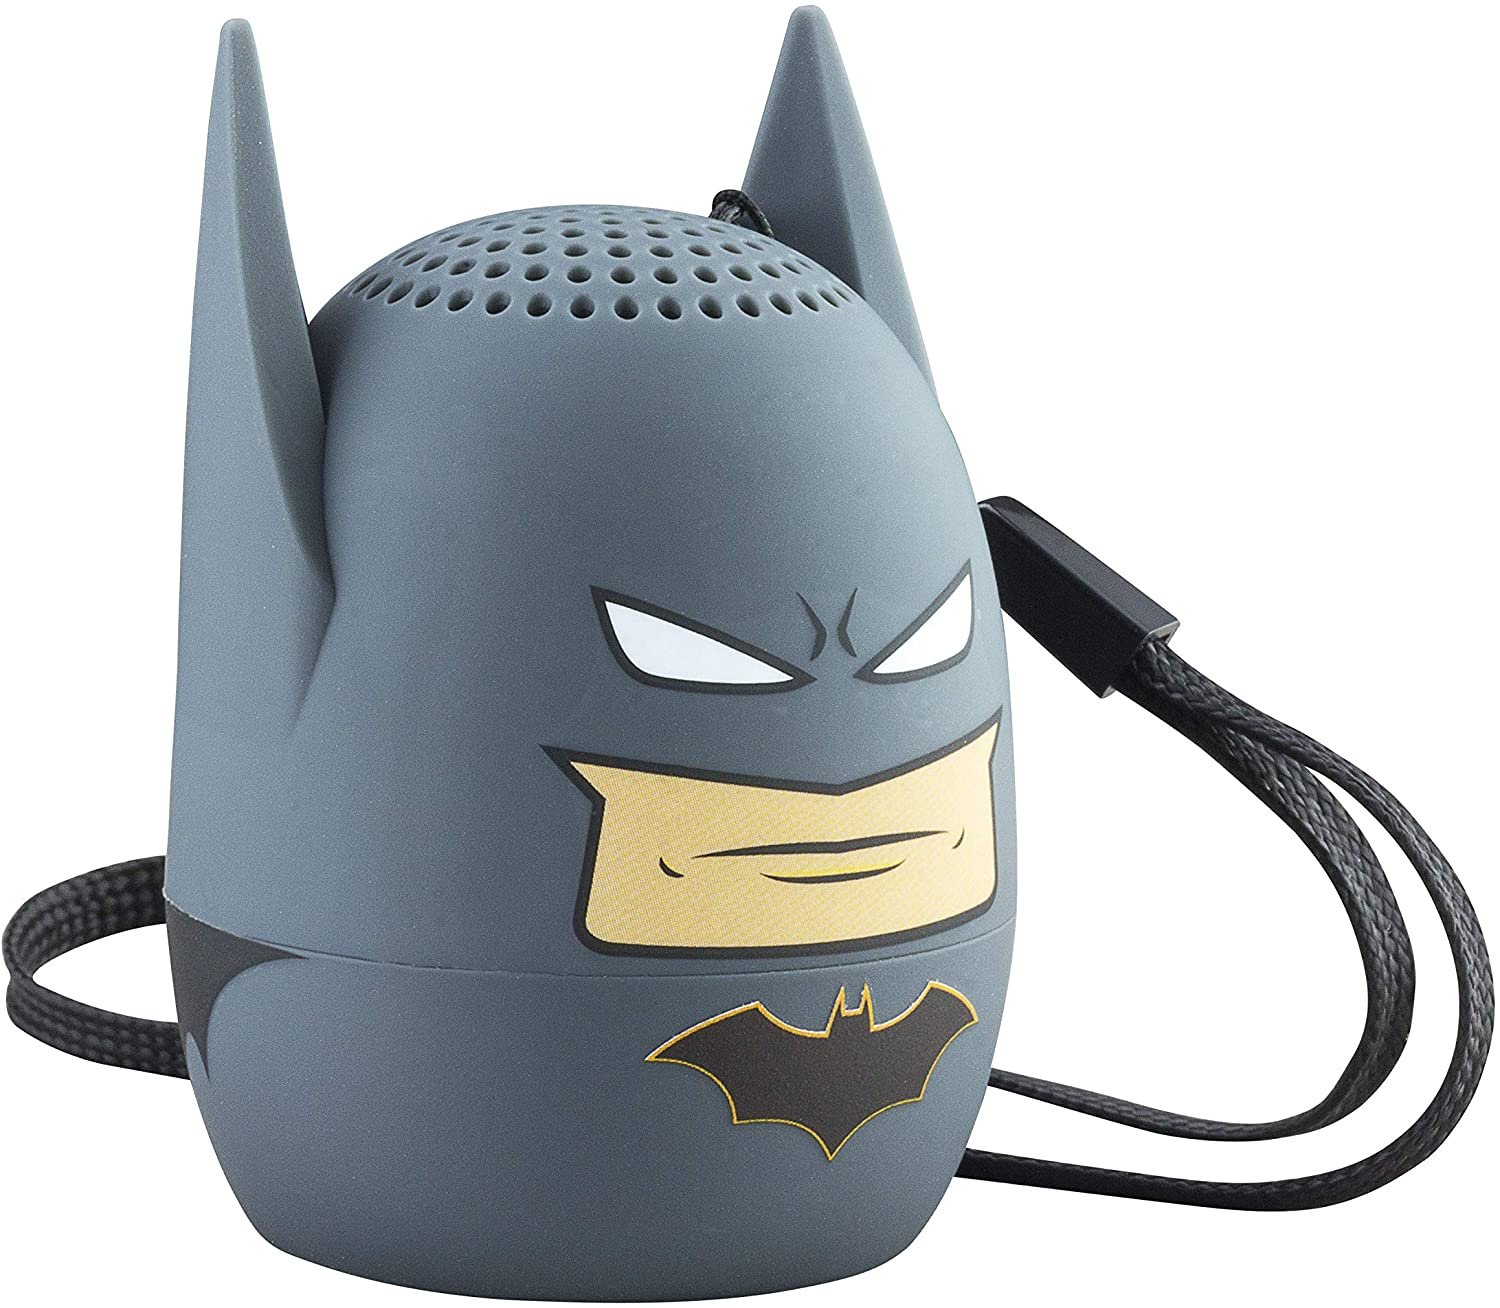 Batman Bluetooth Speaker Portable Wireless Small But Loud N Crystal Clear Mini Bluetooth Speakers for Home, Travel, Outdoor, Beach, Shower, Rechargeable, Compatible with iPhone Samsung - image 3 of 4